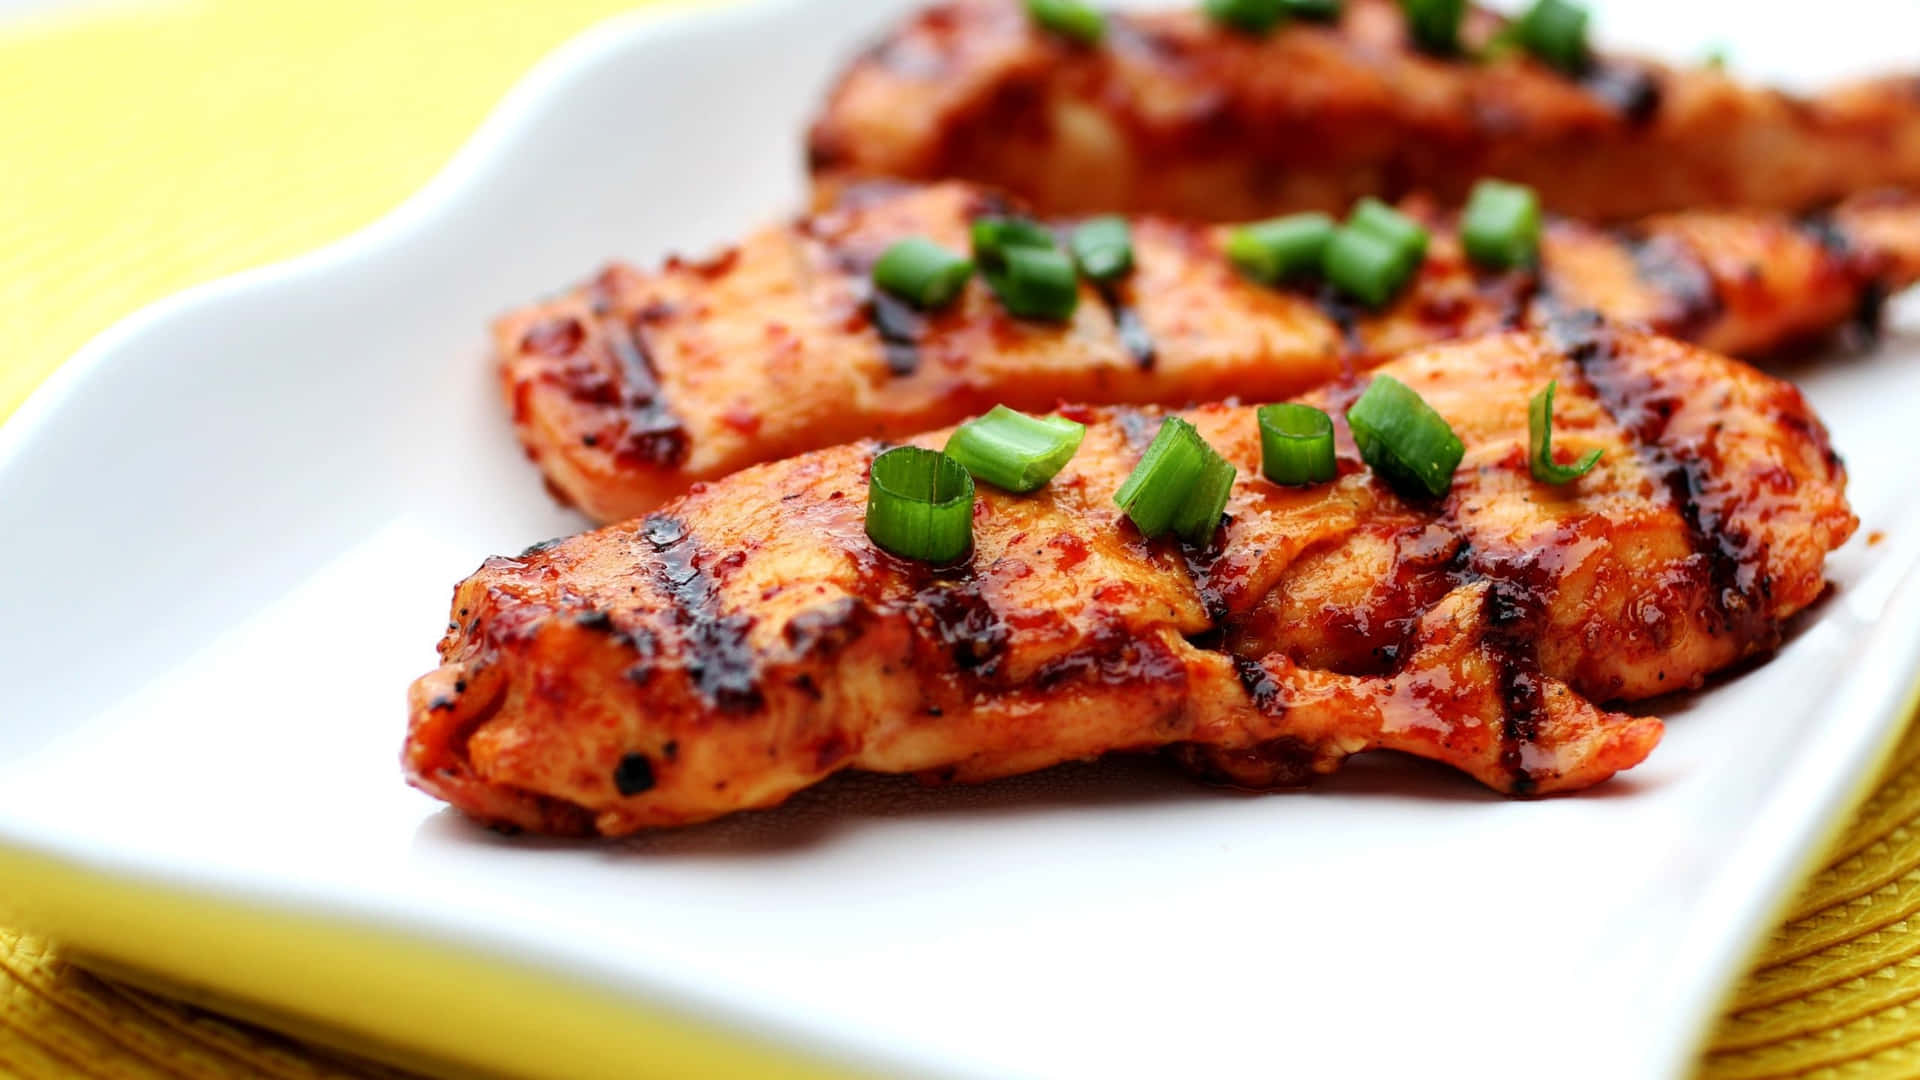 Grilled Chicken On A White Plate With Green Onions